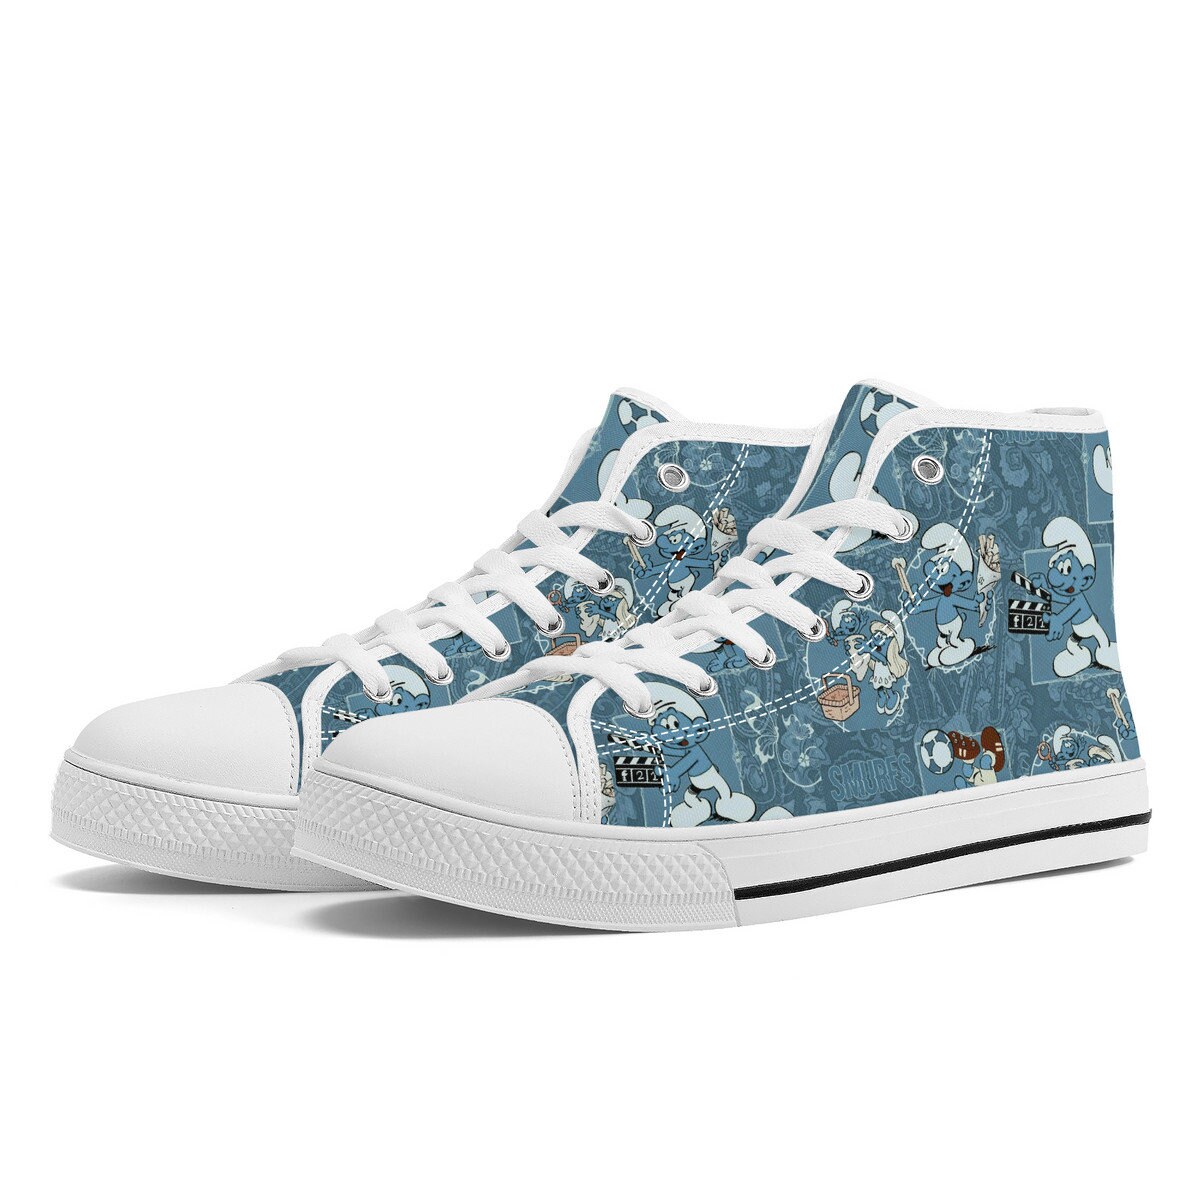 Discover Smurfy High-Top Sneakers for Smurf Lovers